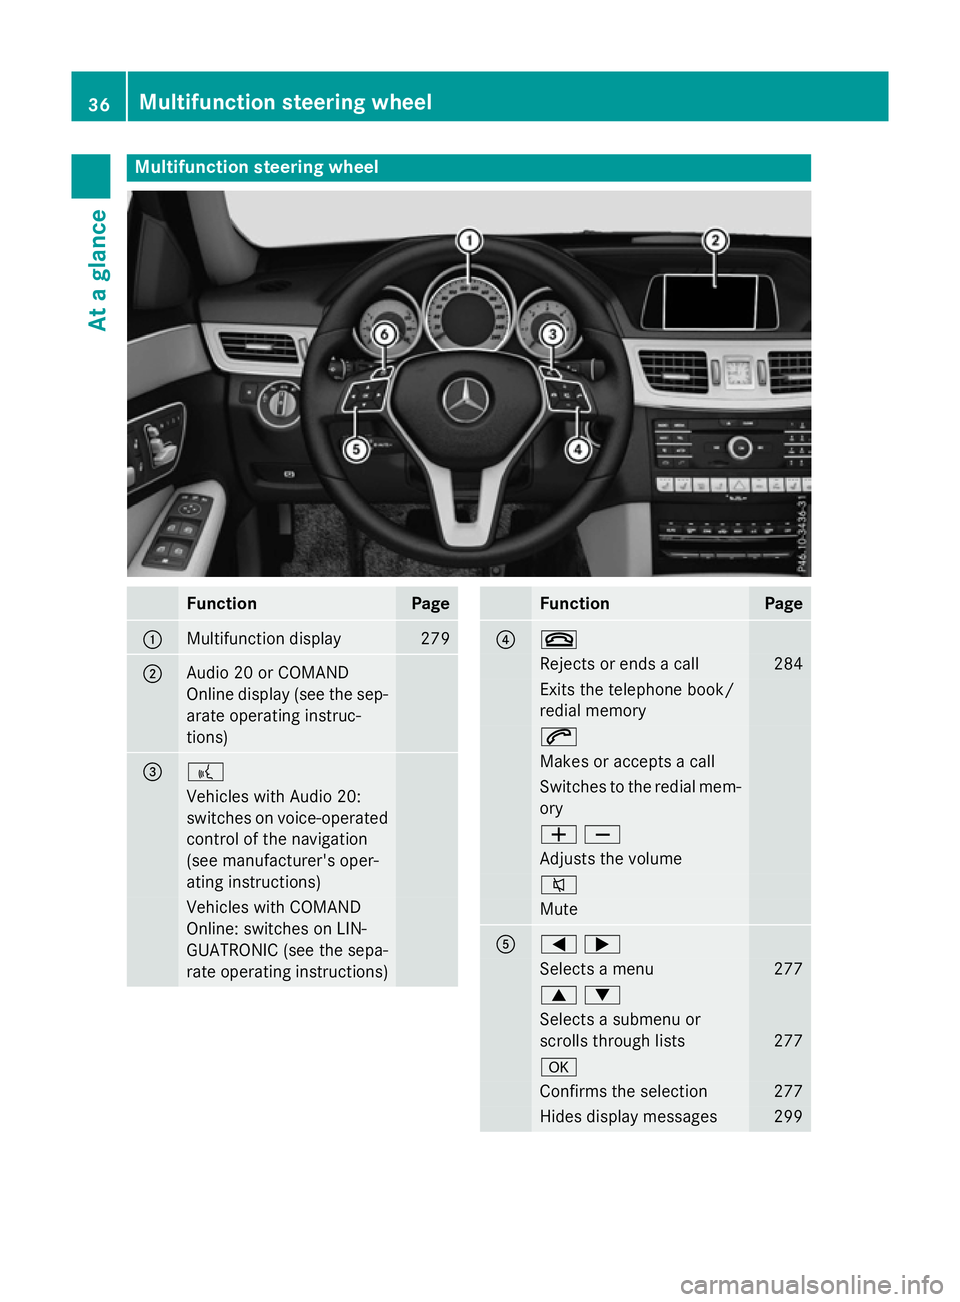 MERCEDES-BENZ E-CLASS SALOON 2015  Owners Manual Multifunction steering wheel
Function Page
:
Multifunction display 279
;
Audi
o20orC OMAND
Online display (see the sep-
arate operating instruc-
tions) = ?
Vehicles with Audi
o20:
switches on voice-op